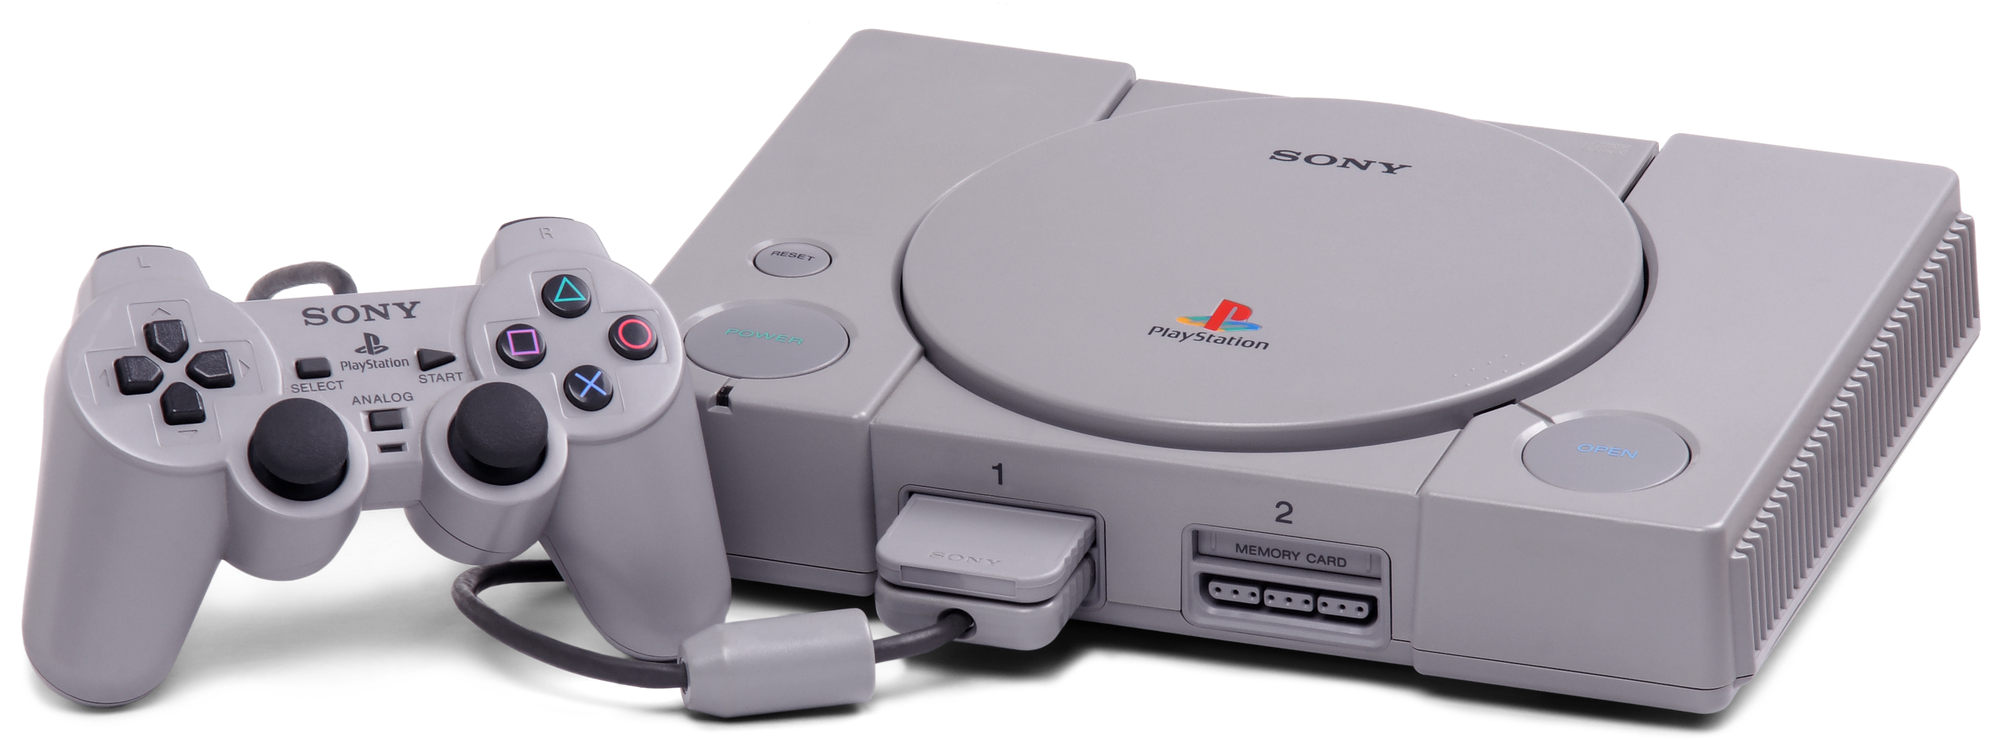 The Story of the Playstation, the first games console to sell over 100 million units